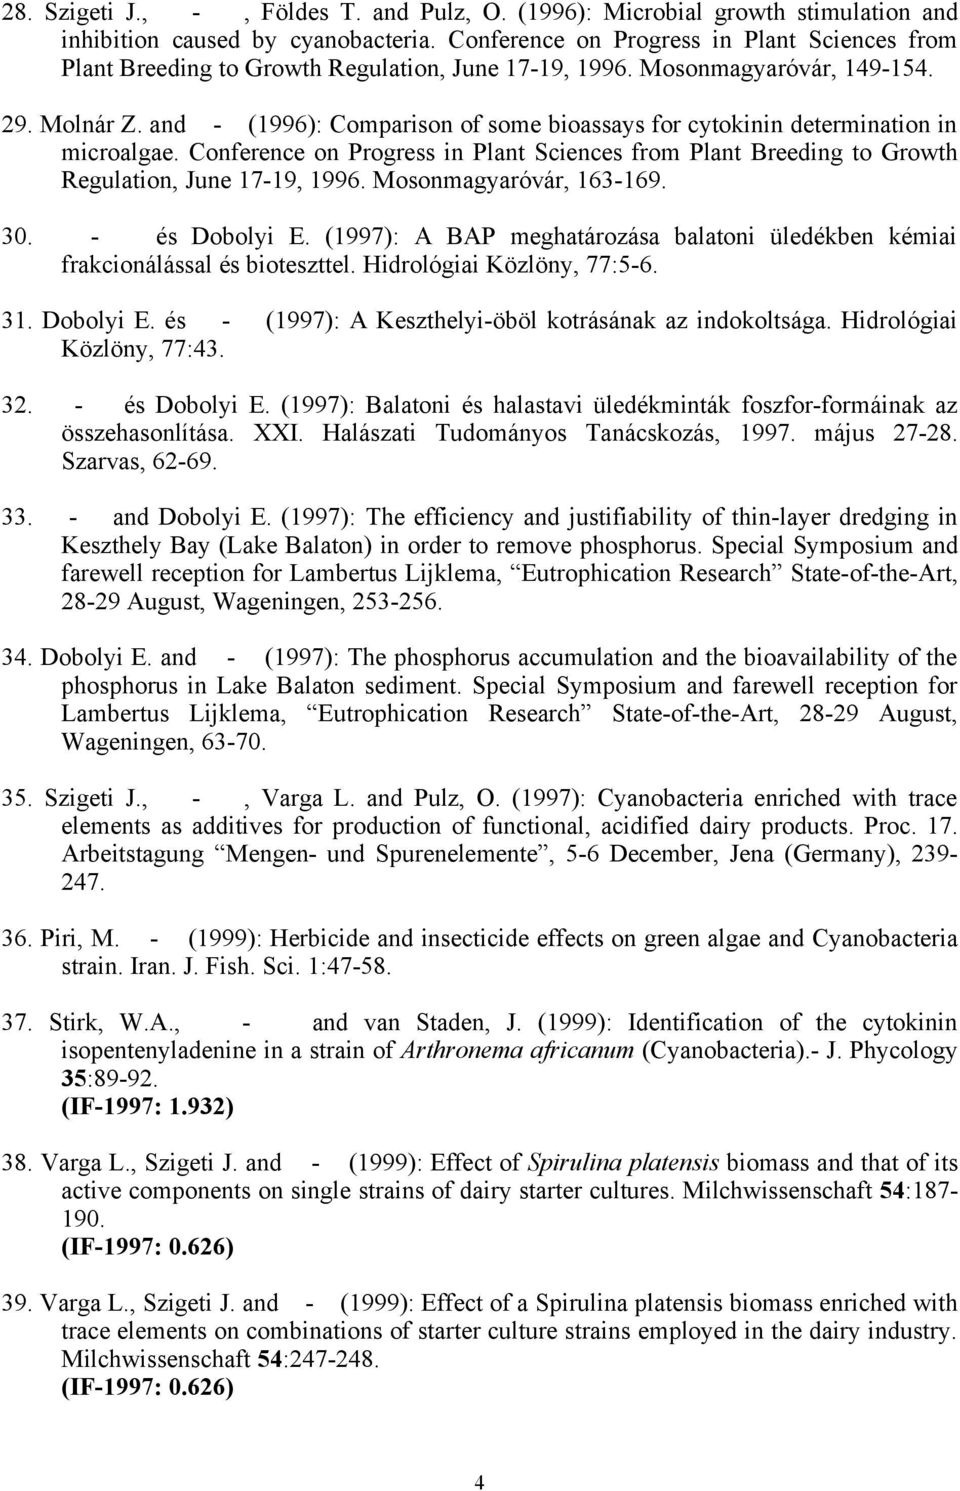 and - (1996): Comparison of some bioassays for cytokinin determination in microalgae. Conference on Progress in Plant Sciences from Plant Breeding to Growth Regulation, June 17-19, 1996.